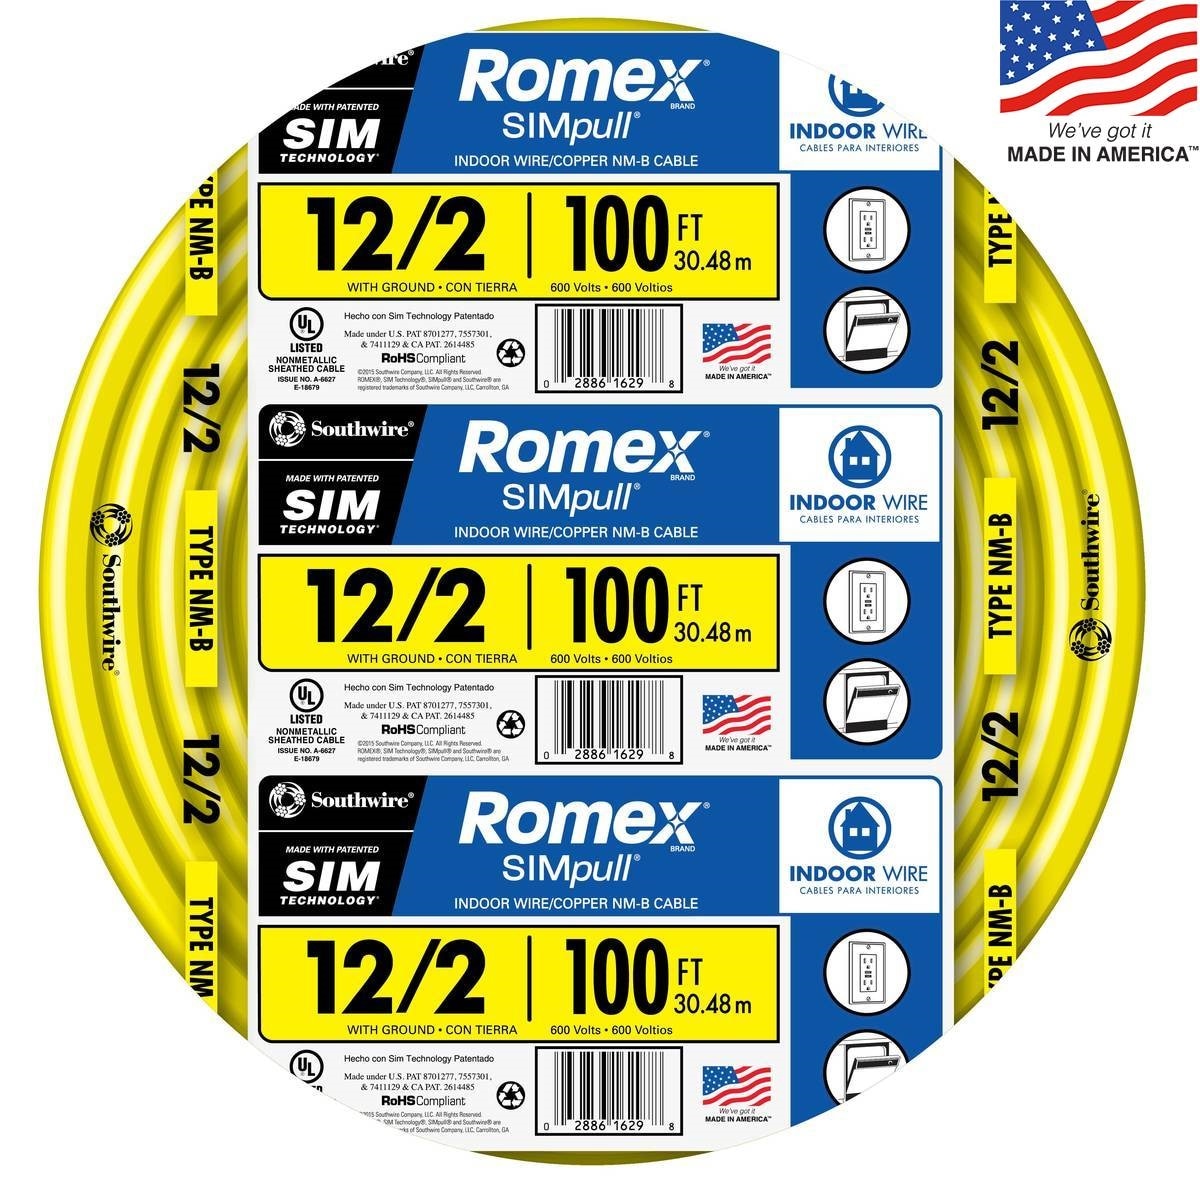 12/2/2 W/GR 10' FT ROMEX INDOOR ELECTRICAL WIRE ALL LENGTHS AVAILABLE